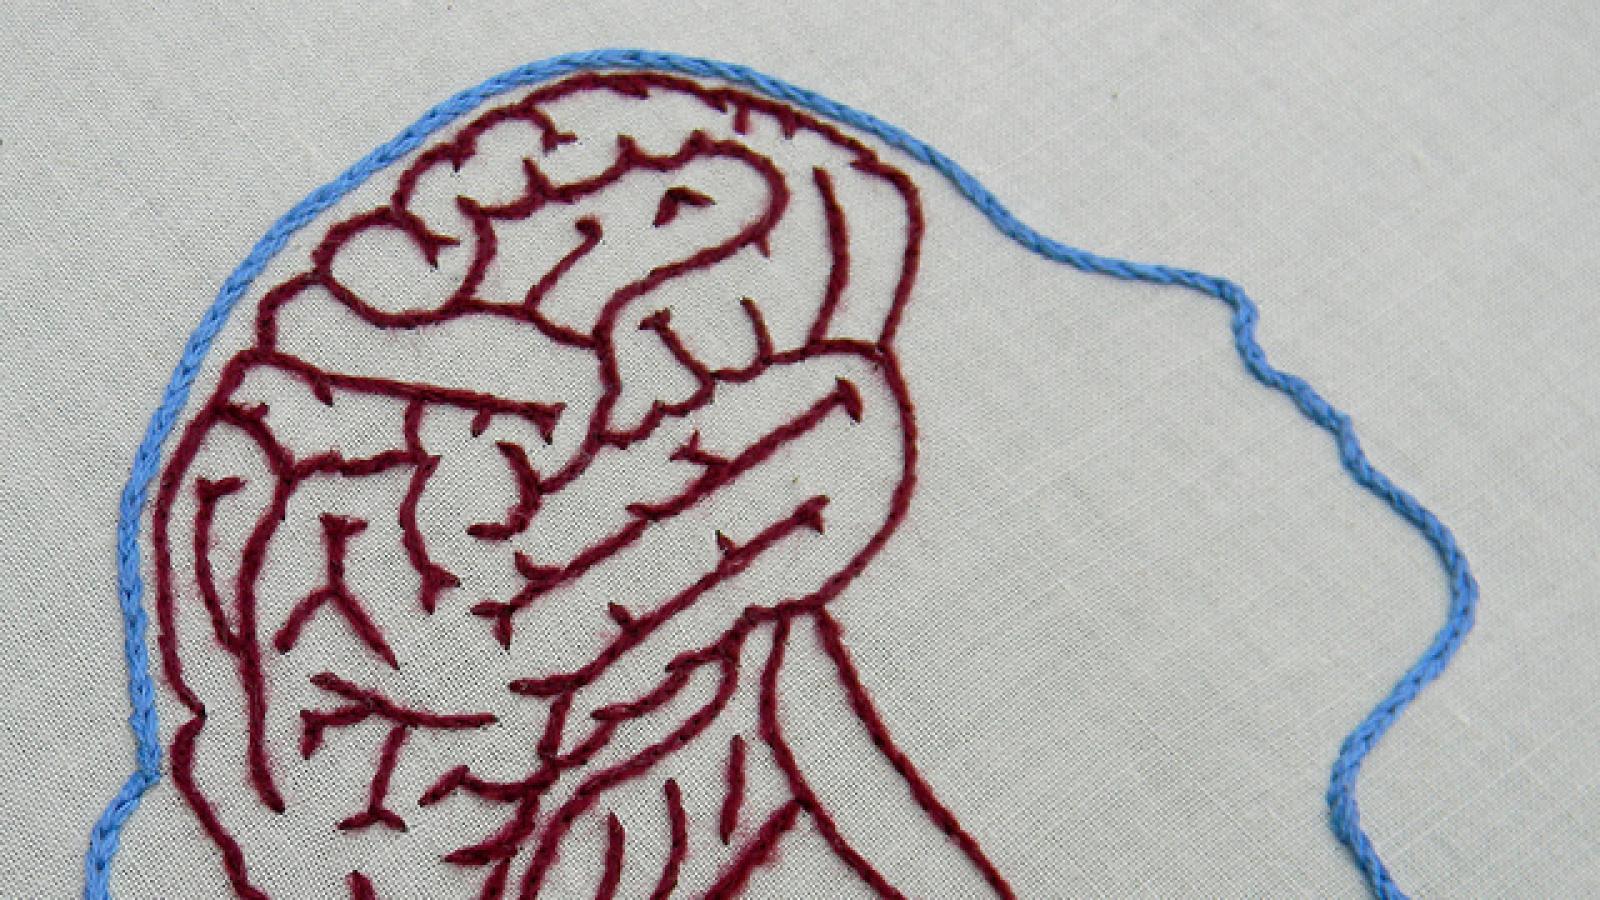 A brain embroidered on an embroidery hoop